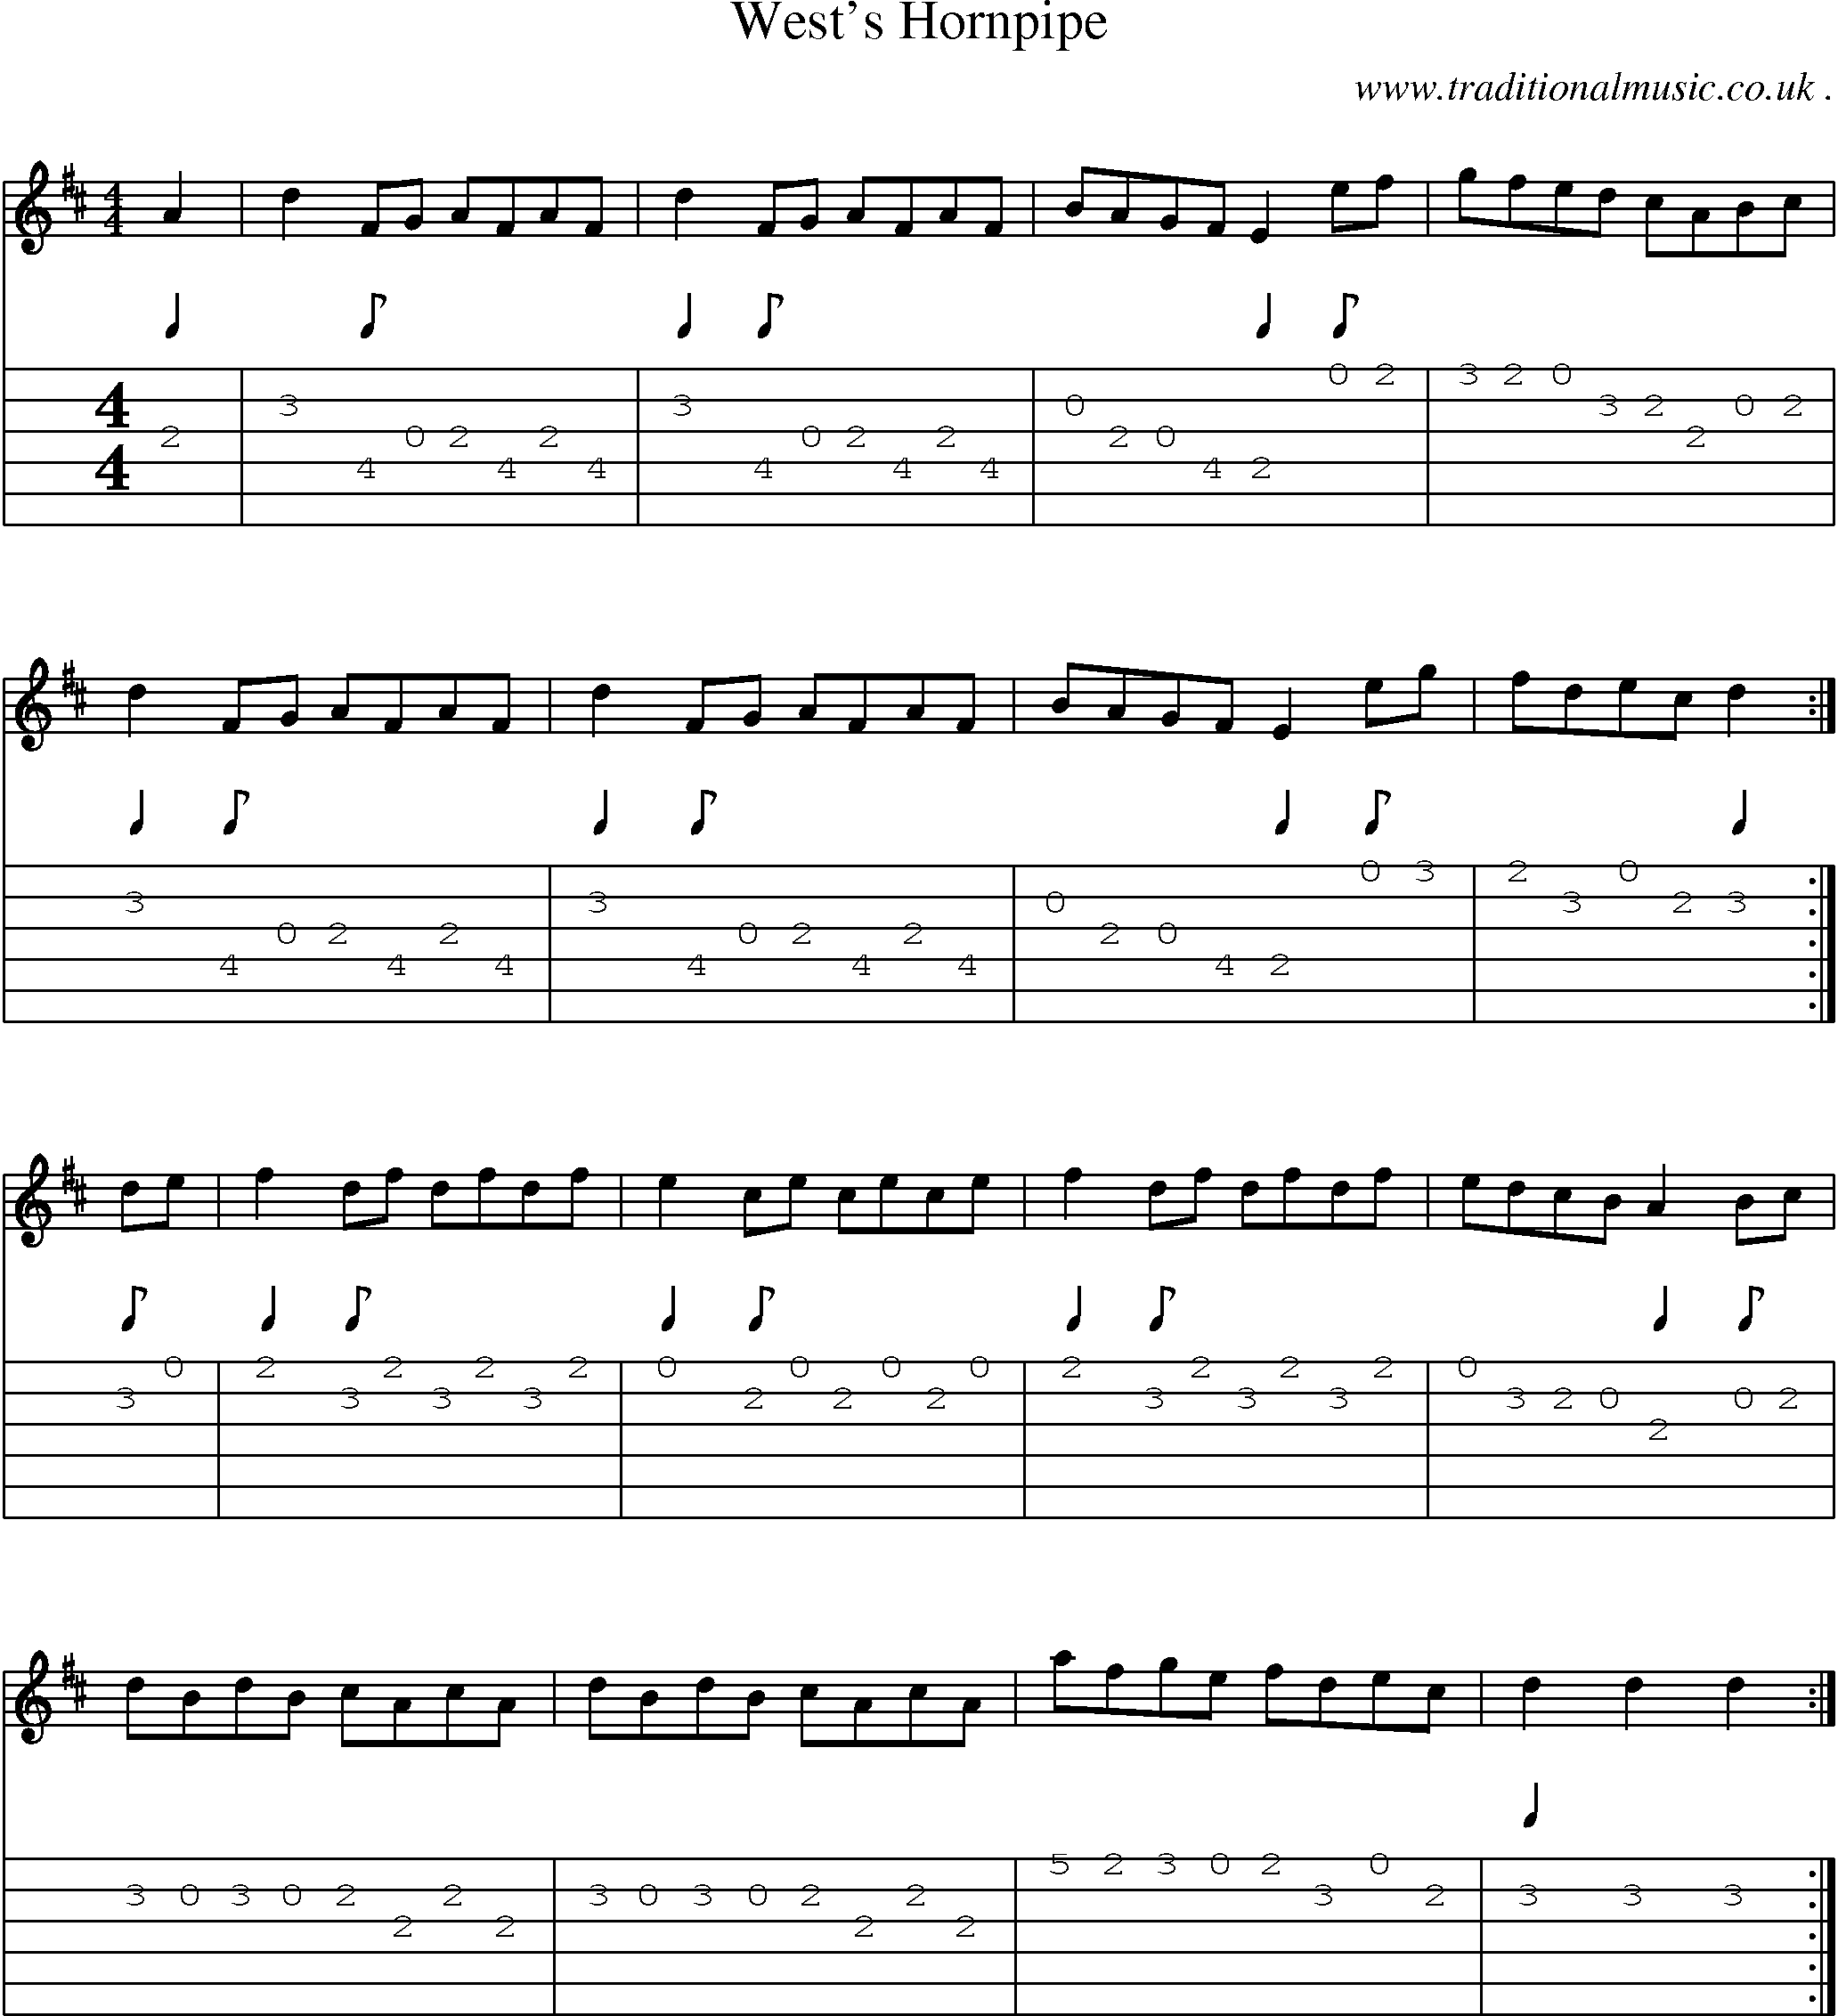 Sheet-music  score, Chords and Guitar Tabs for Wests Hornpipe